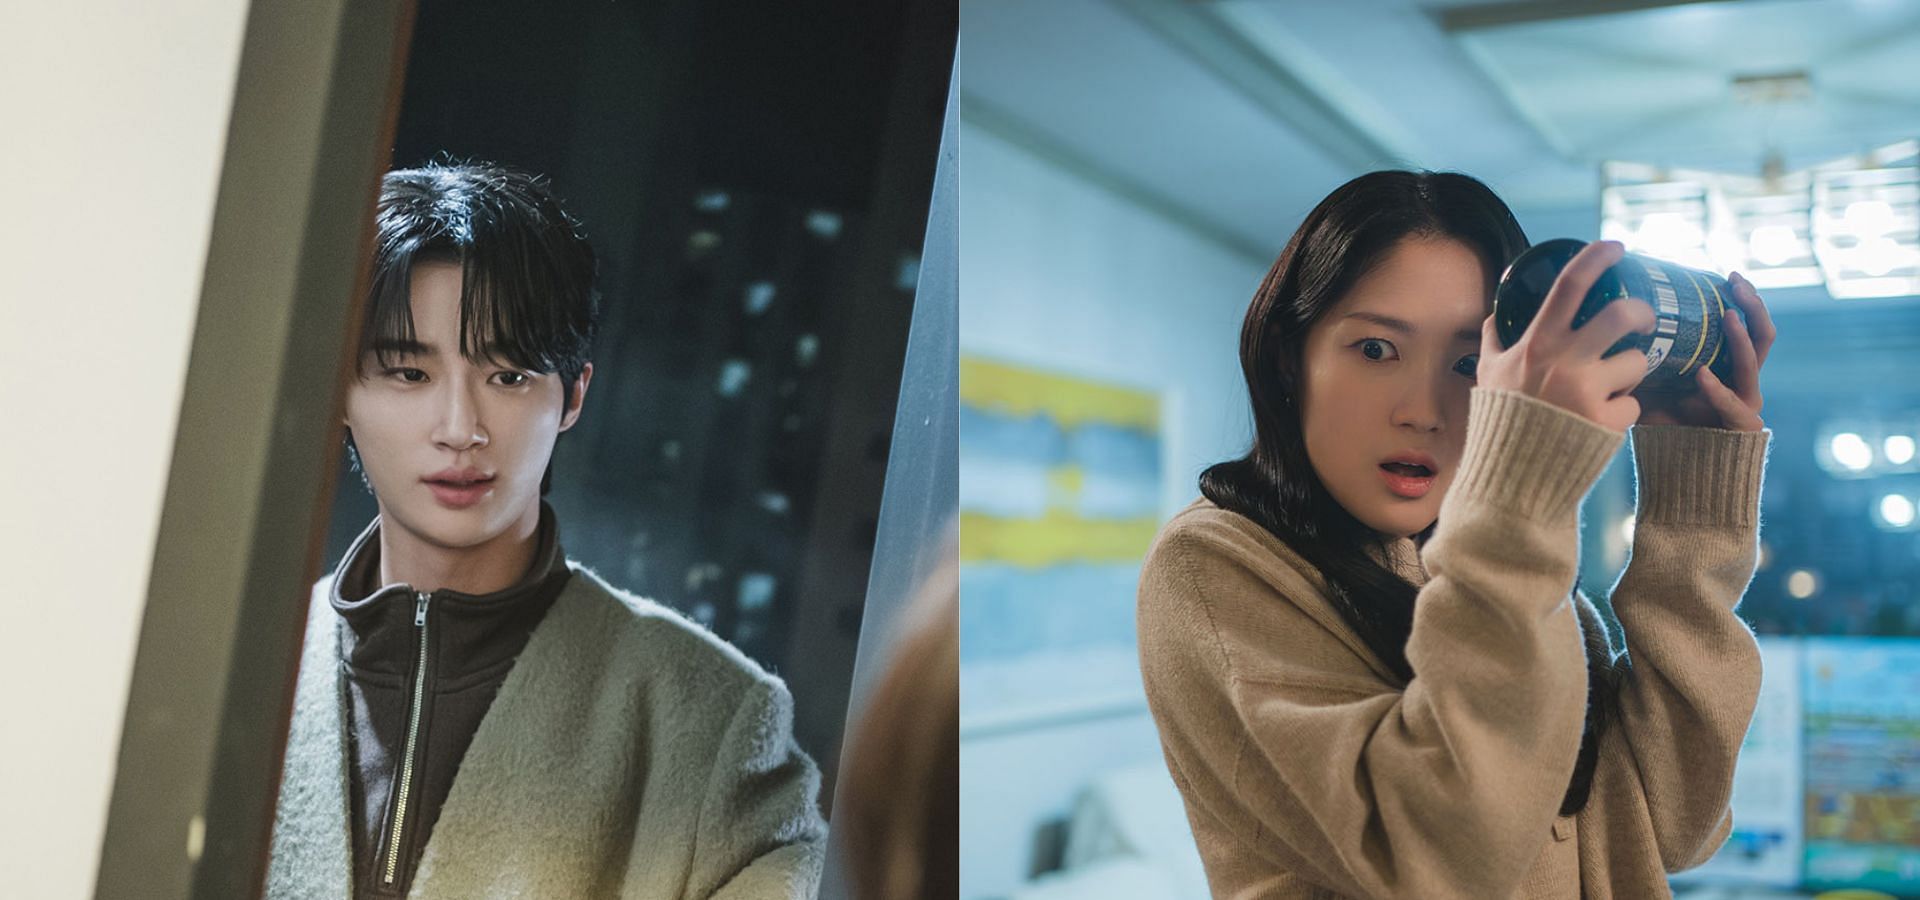 Lovely Runner preview images featuring Byeon Woo-seok &amp; Kim Hye-yoon (Images Via X/@cjndrama) 